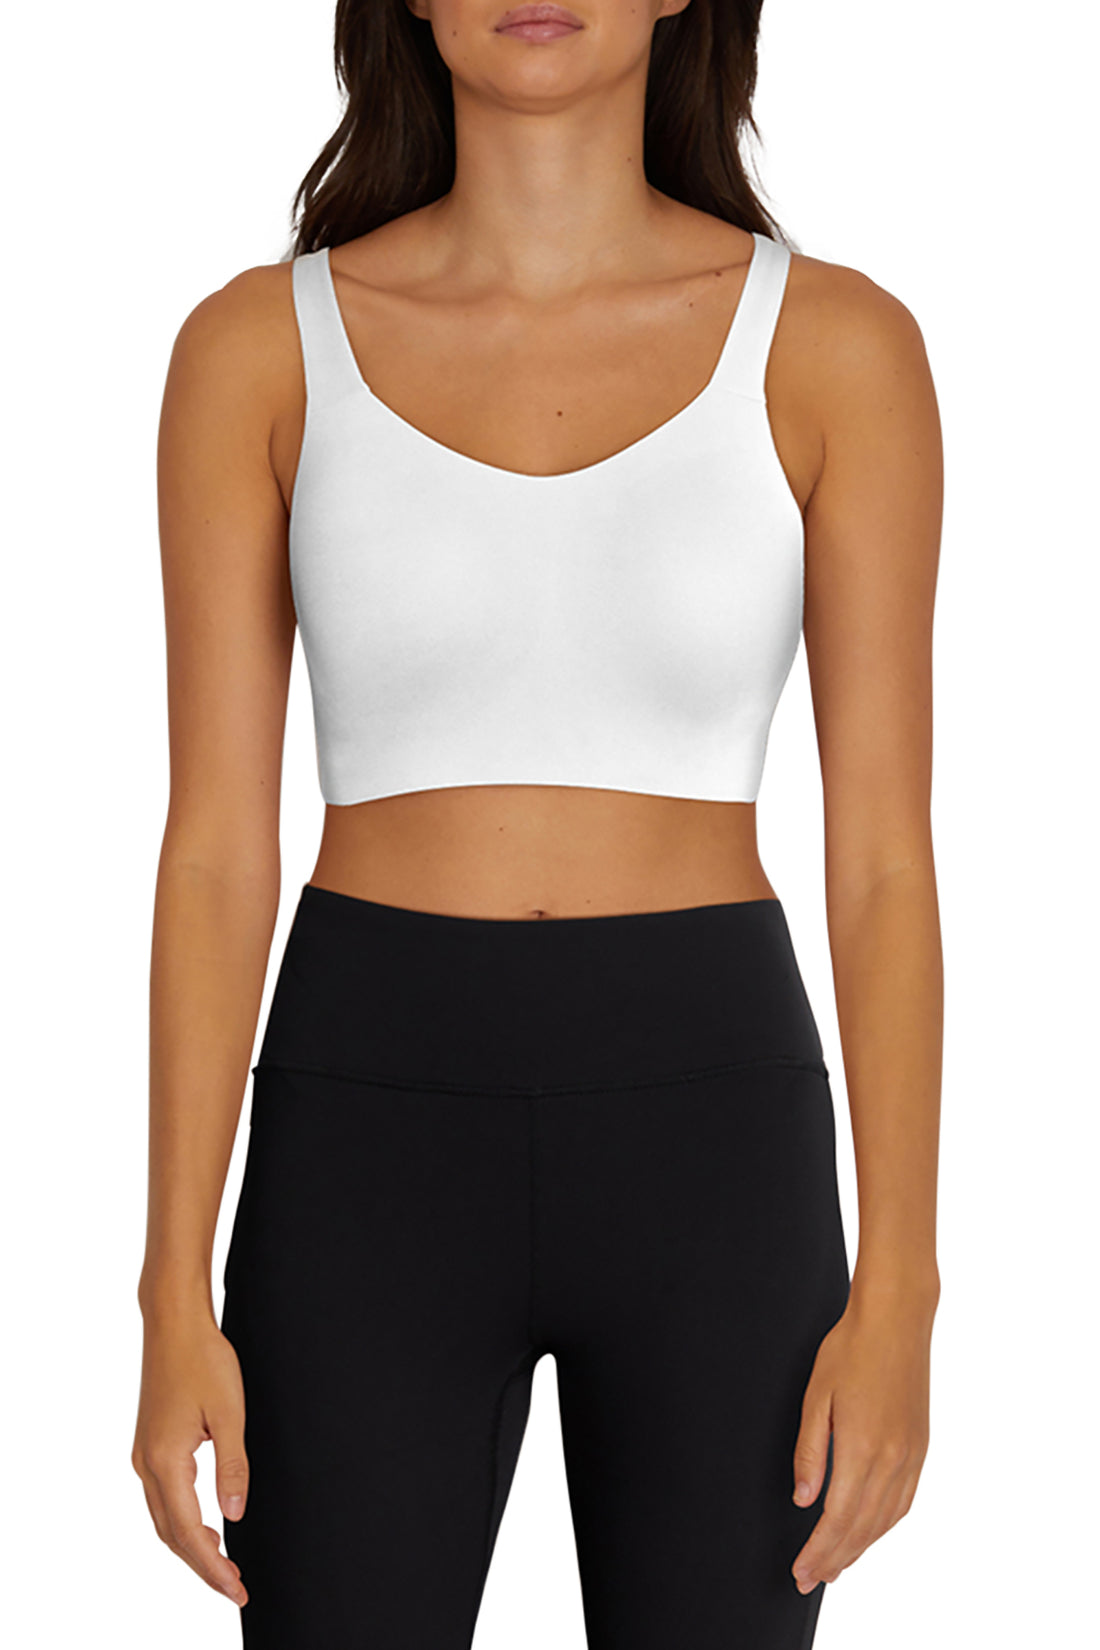 Rivemug, Sports Bra, 82% Polyester 18% Spandex Best for A to C